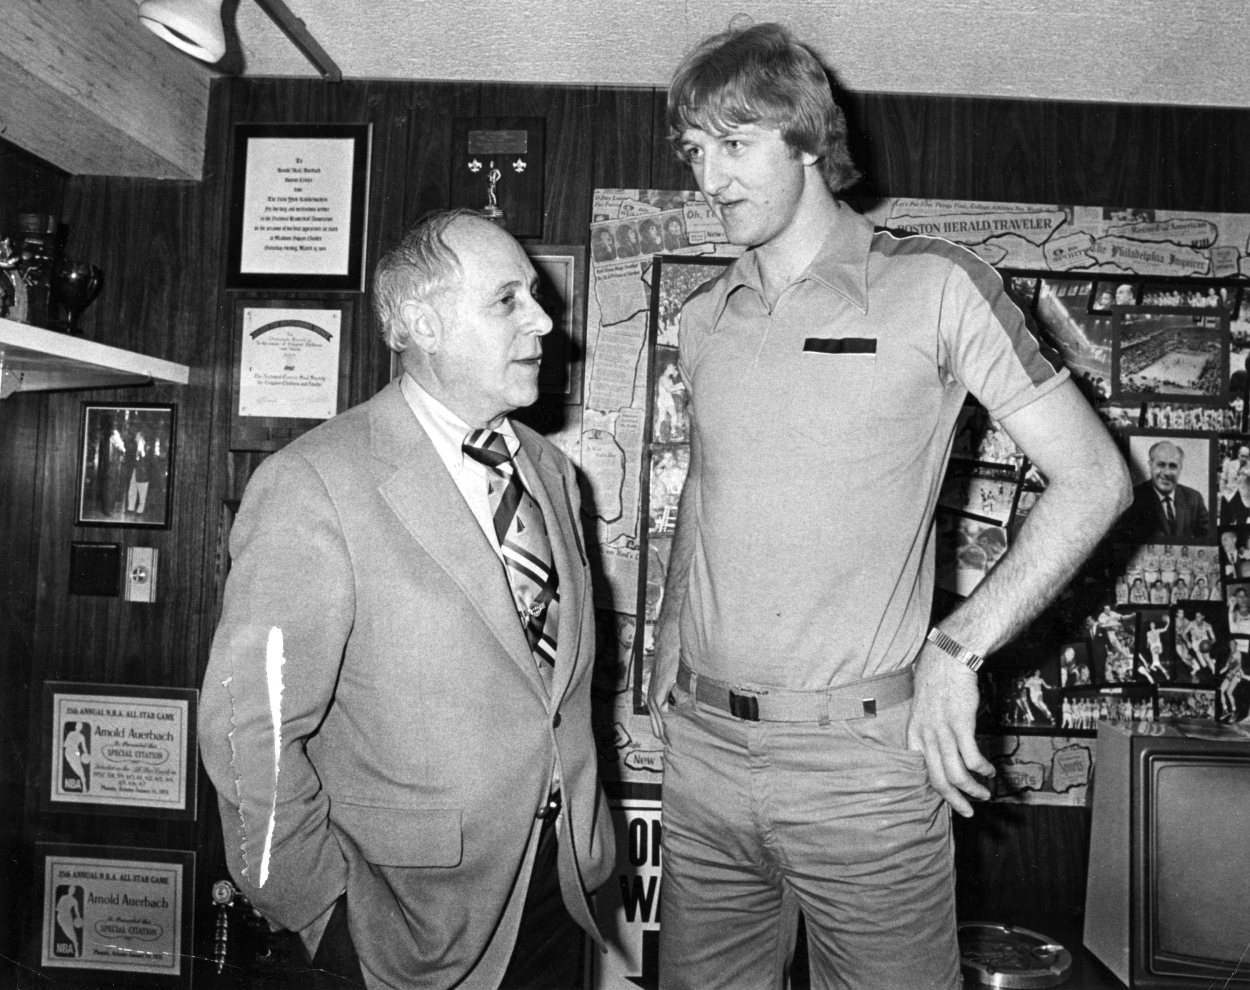 Boston Celtics general manager Red Auerbach, left, talks with Indiana State player Larry Bird.